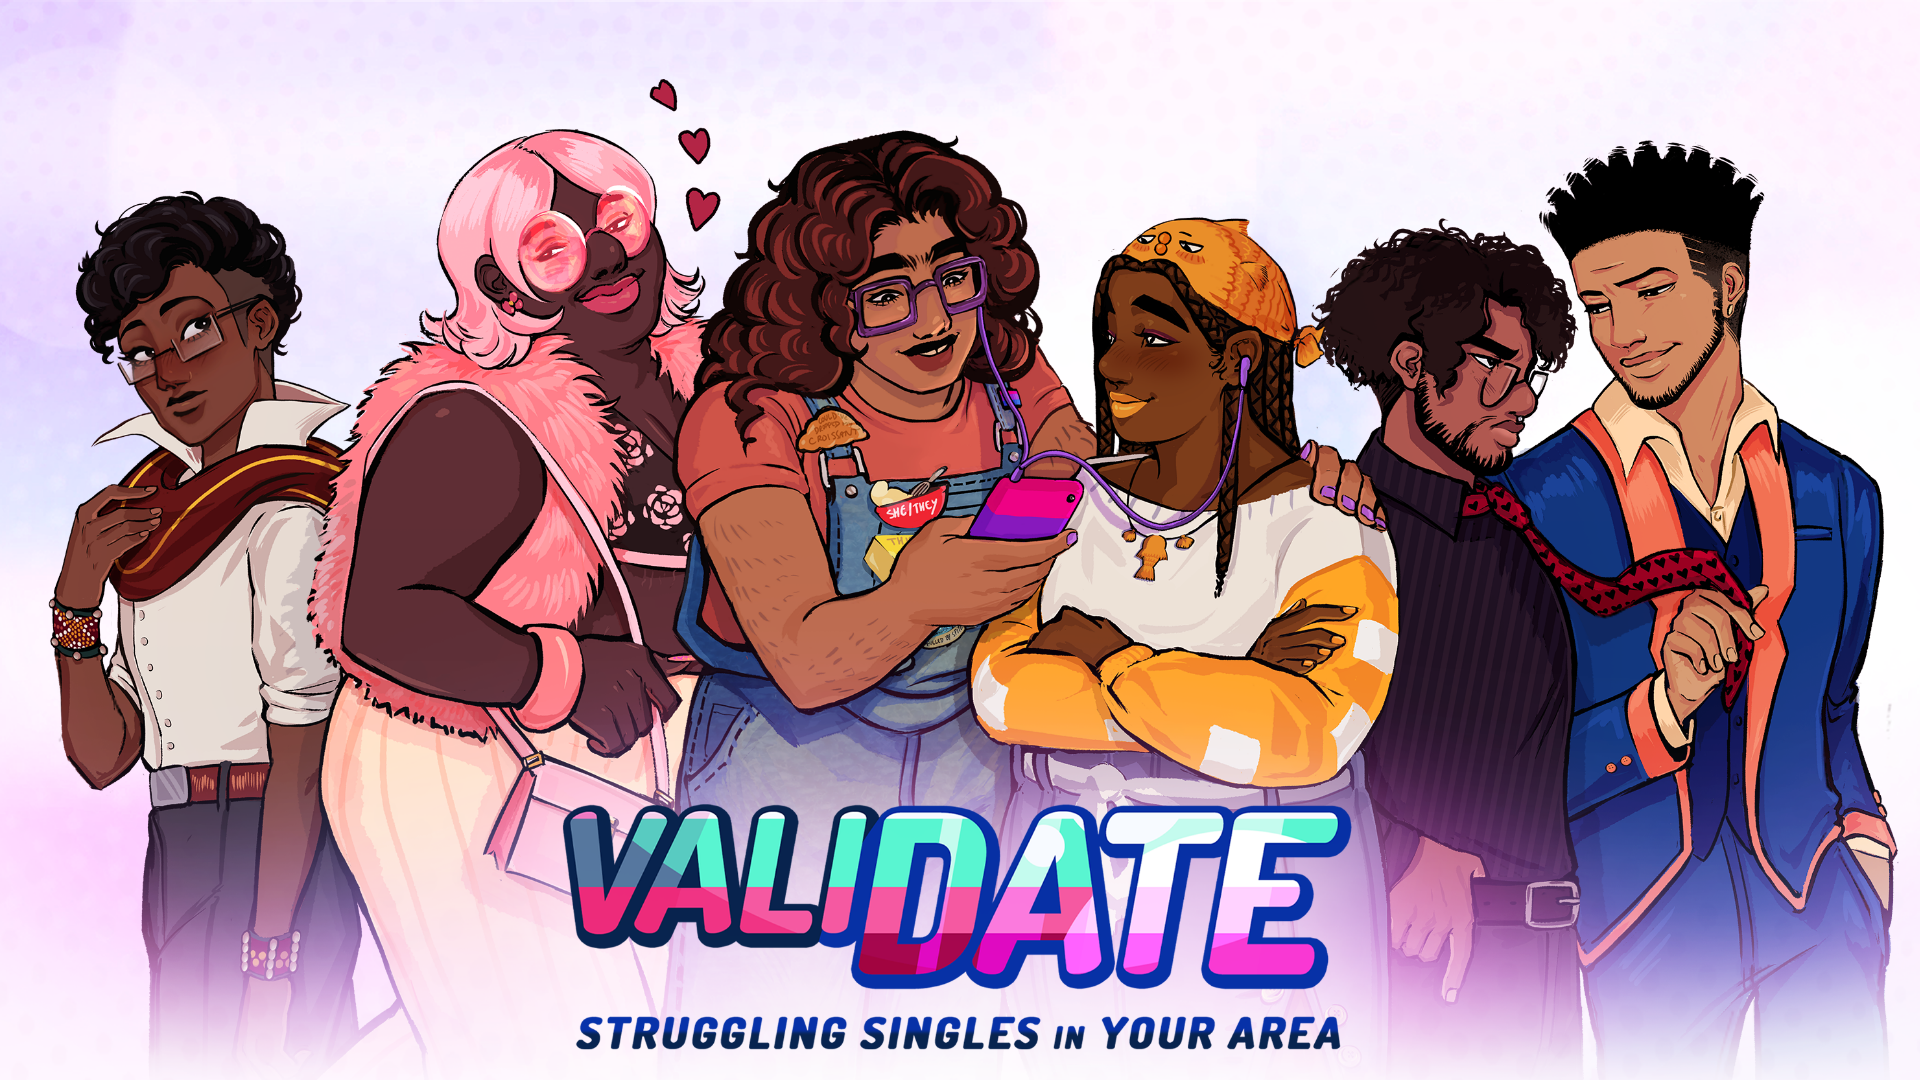 ValiDate: Struggling Singles in Your Area Demo